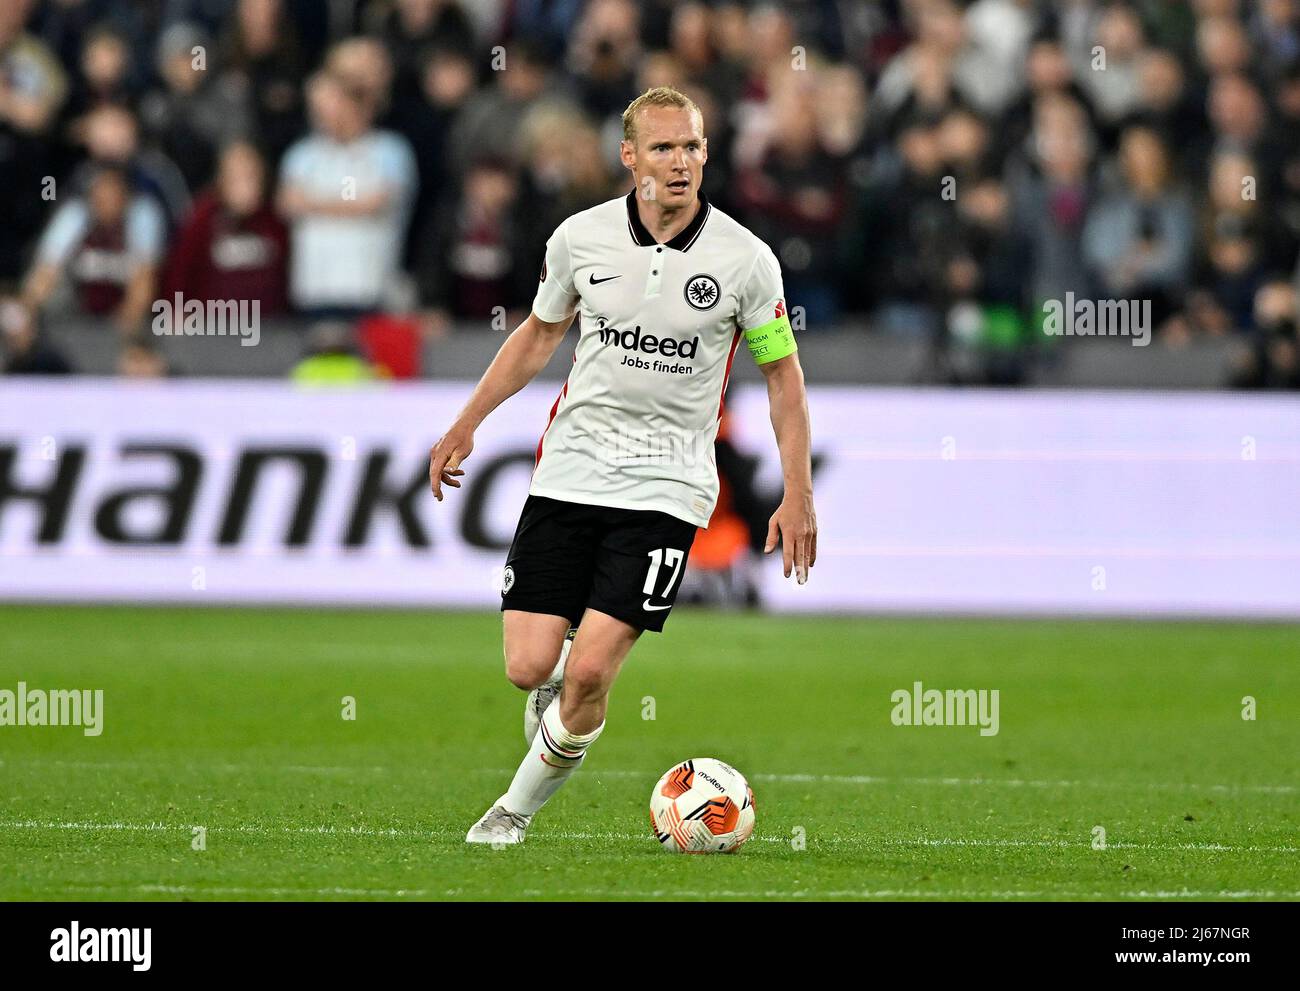 London UK 28th April 2022. Sebastian Rode (Frankfurt) during the West Ham vs Eintracht Frankfurt Uefa Europa Cup semi final 1st leg match at the London Stadium, Stratford.Credit: Martin Dalton/Alamy Live News. This Image is for EDITORIAL USE ONLY. Licence required from the the Football DataCo for any other use. Credit: MARTIN DALTON/Alamy Live News Stock Photo